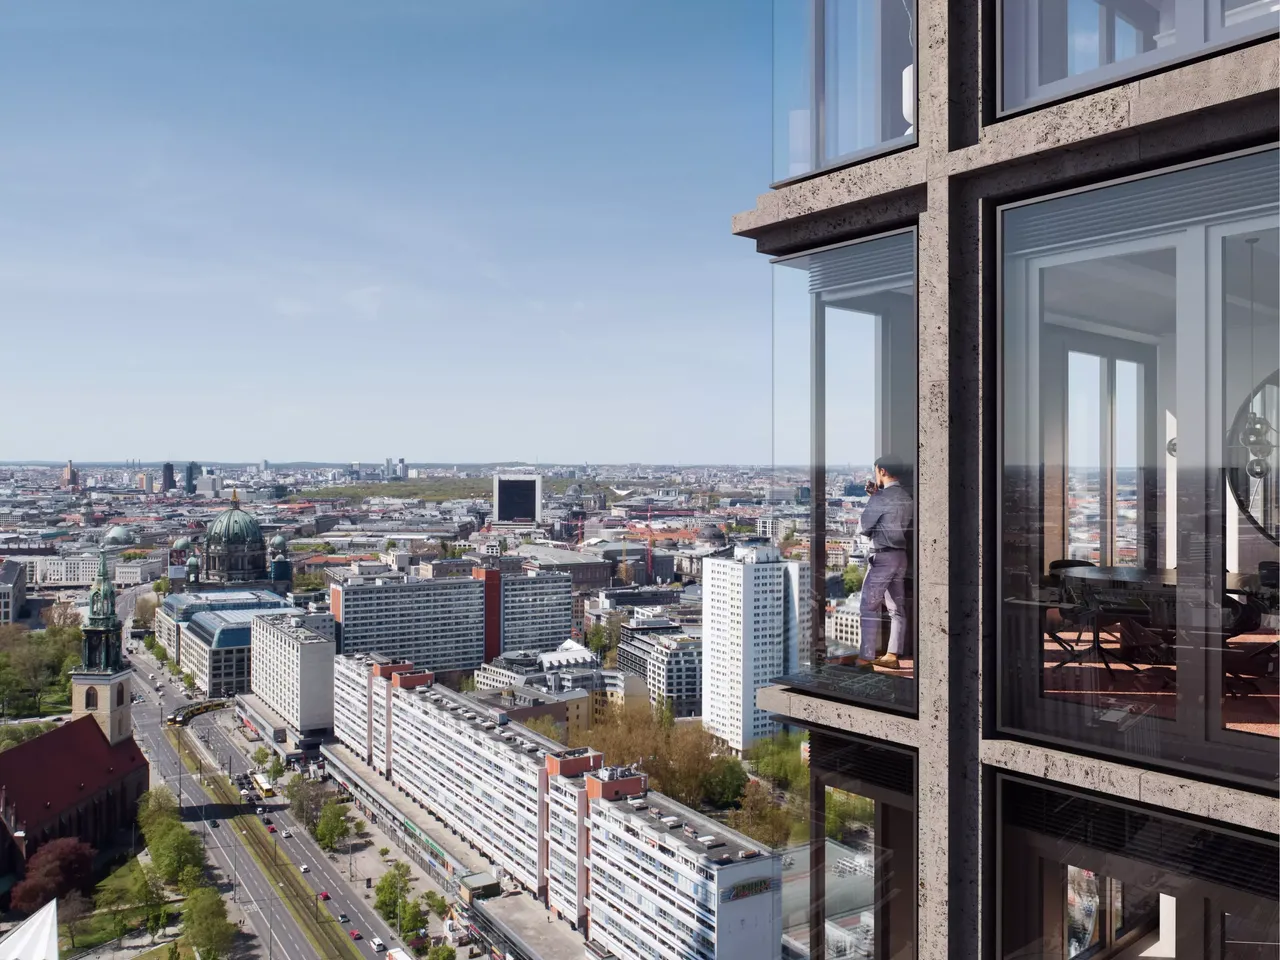 commerzreal-hausinvest-office-mynd-berlin-we375-visualisierung-exterior-11